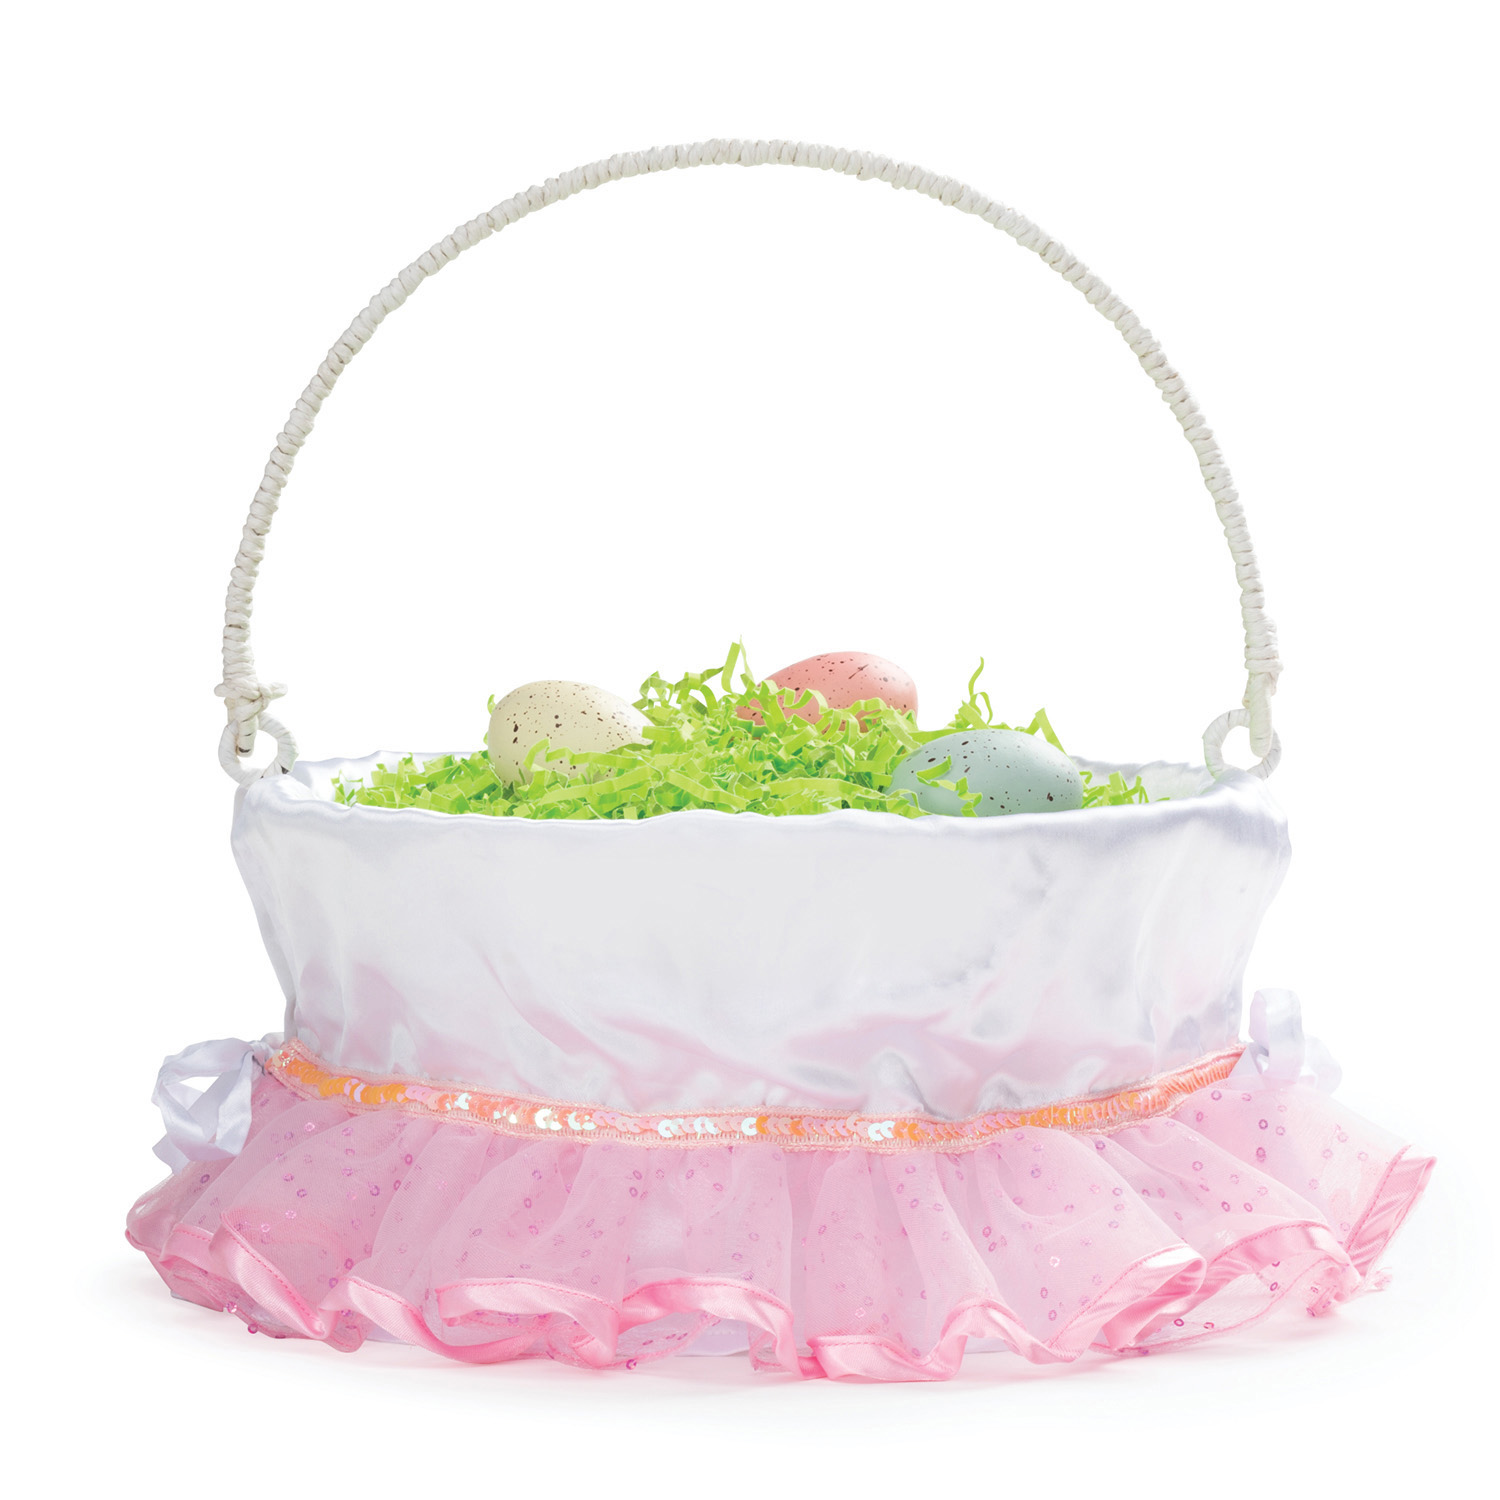 Personalized Planet Pink and White Tutu Liner with Custom Name Embroidered in Pink Thread on White Woven Spring Easter Basket with Collapsible Handle for Egg Hunt or Book Toy Storage - image 3 of 5